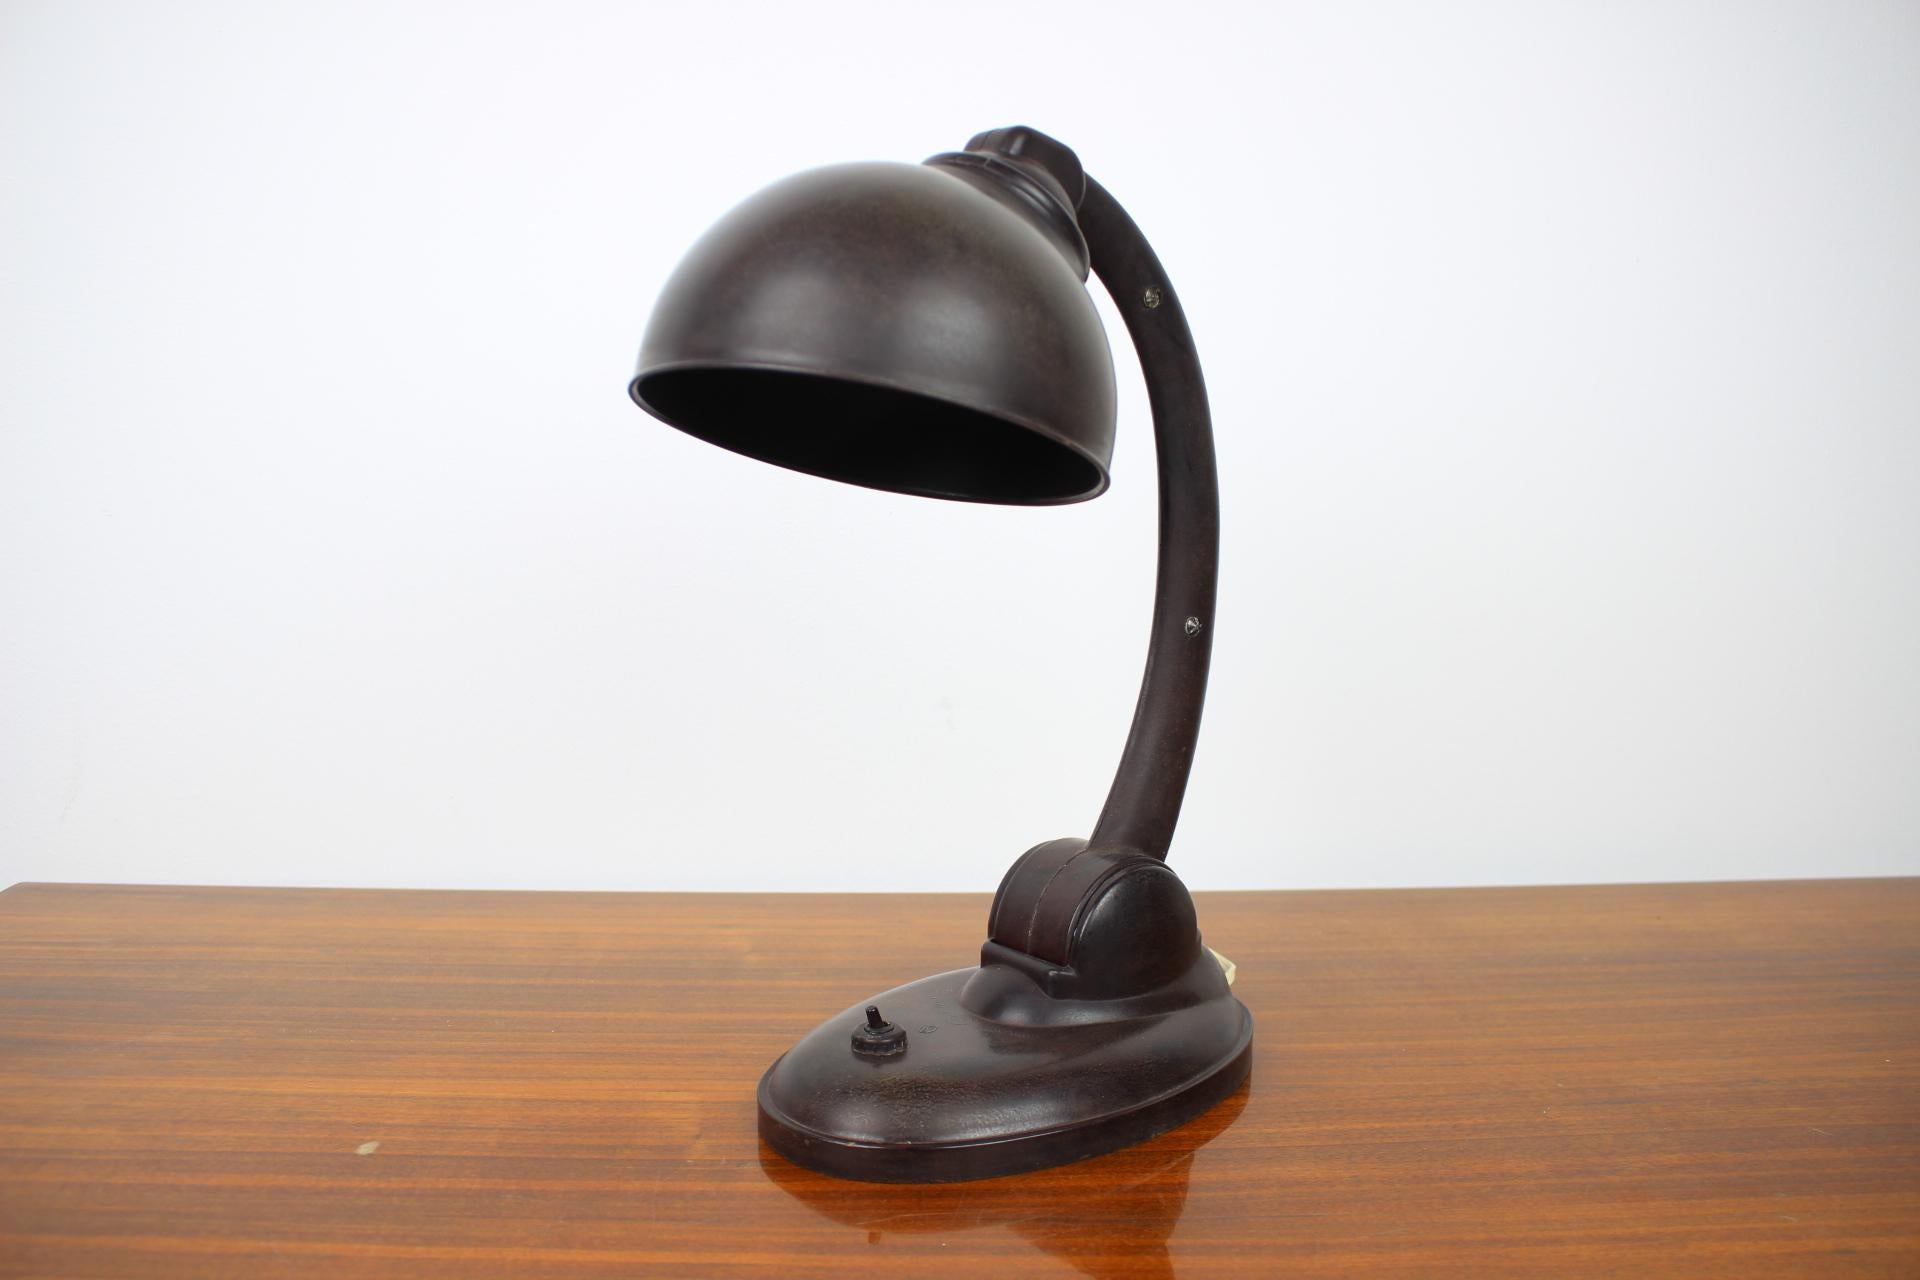 - Made in Czechoslovakia
- Made of bakelite
- Re-polished
- Fully functional
- Good, original condition.